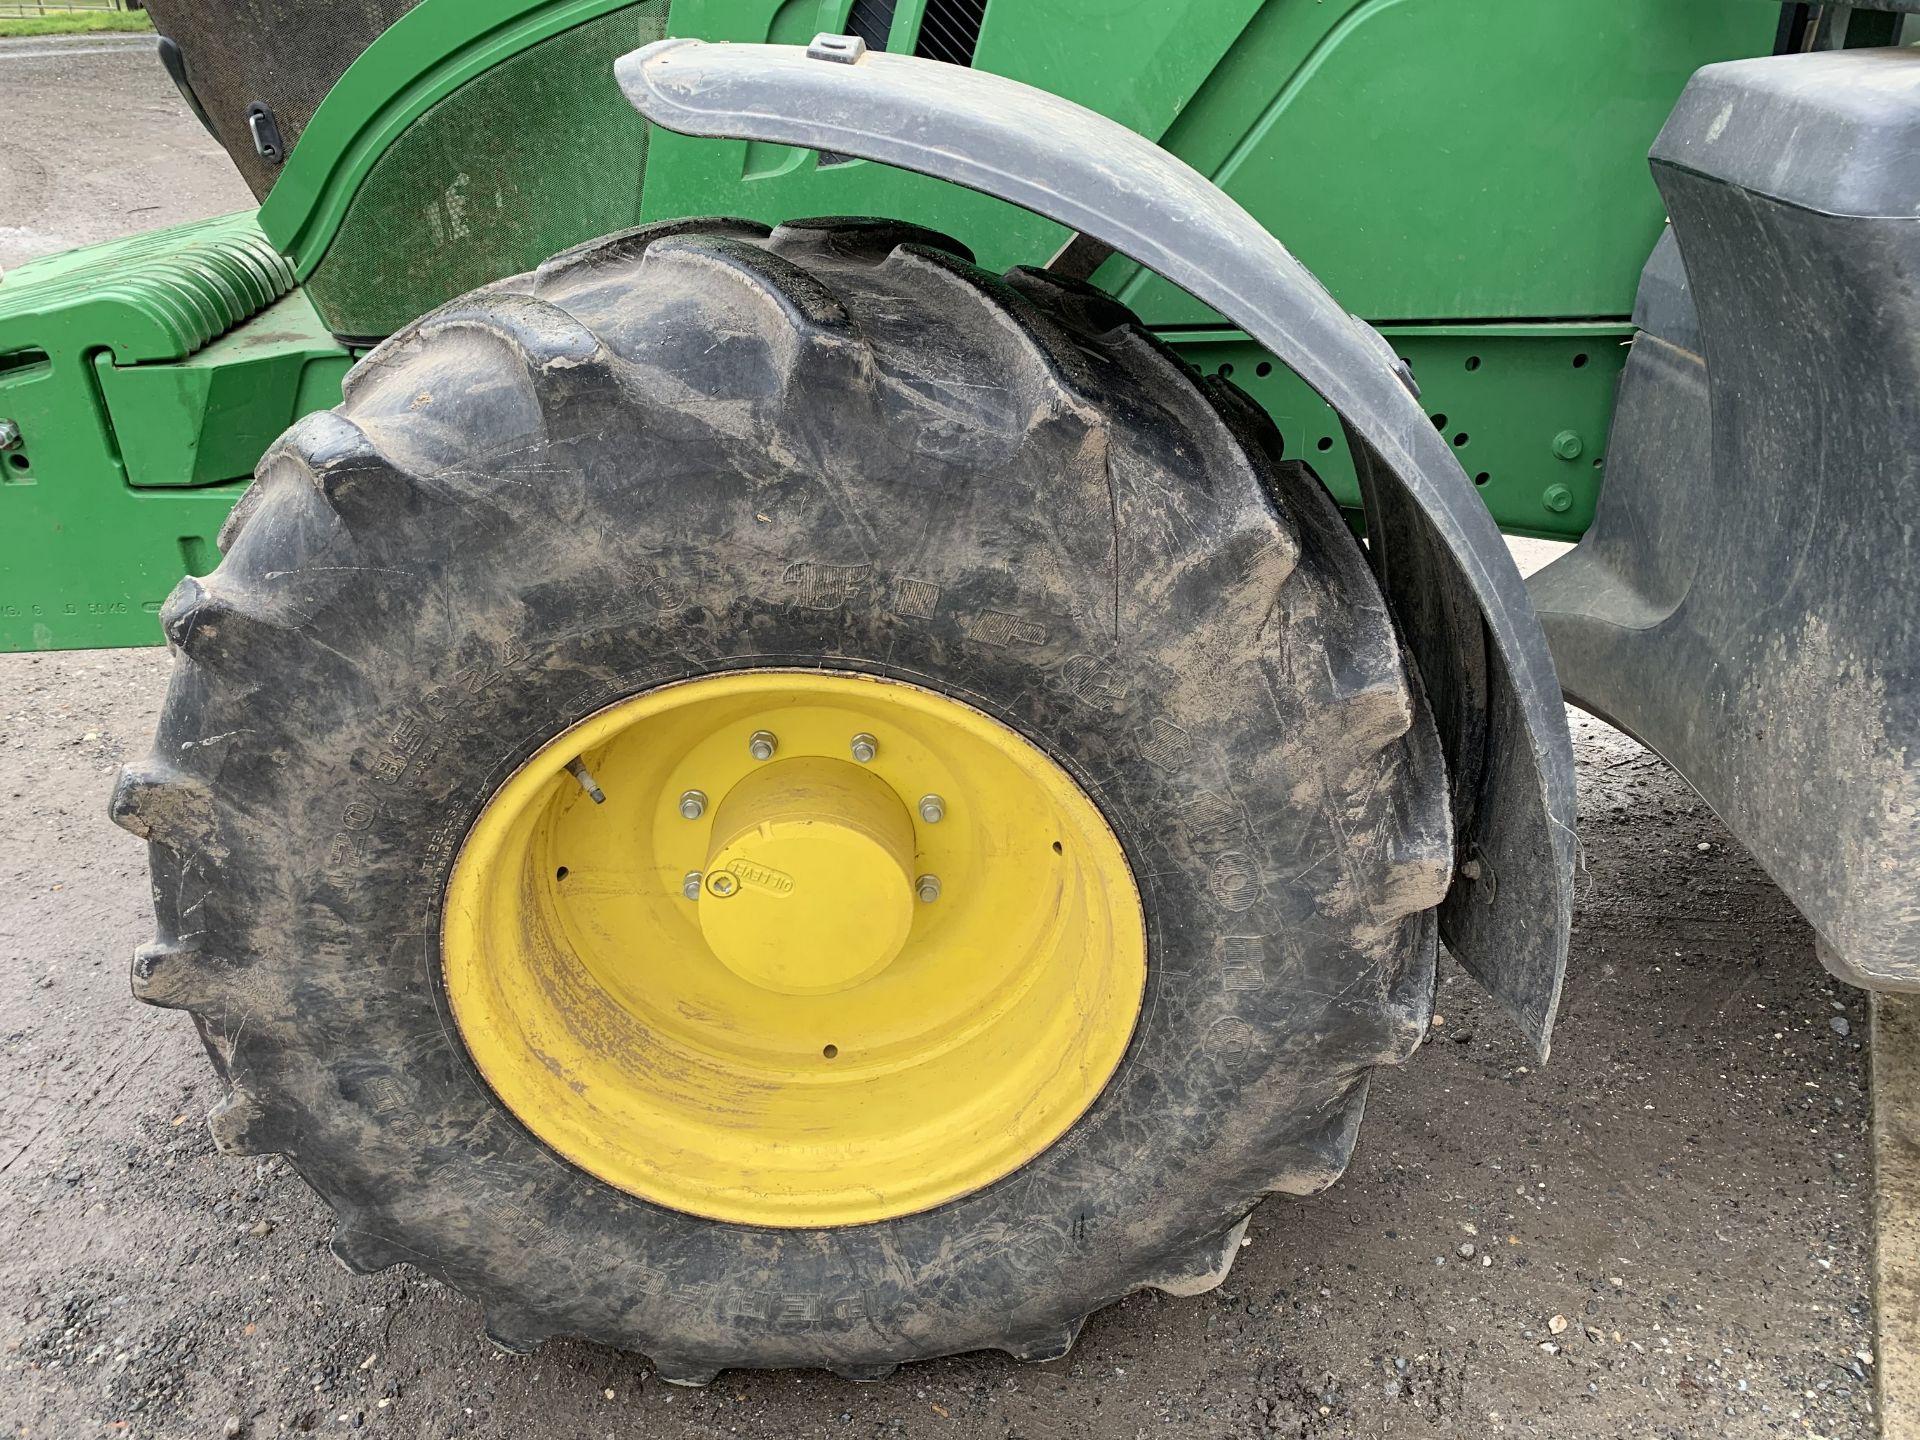 2016 John Deere 6130M tractor, YK16 ZKX, 2645 hours, 18x50kg wafer weights, 420/85R24 front & 460/ - Image 2 of 9